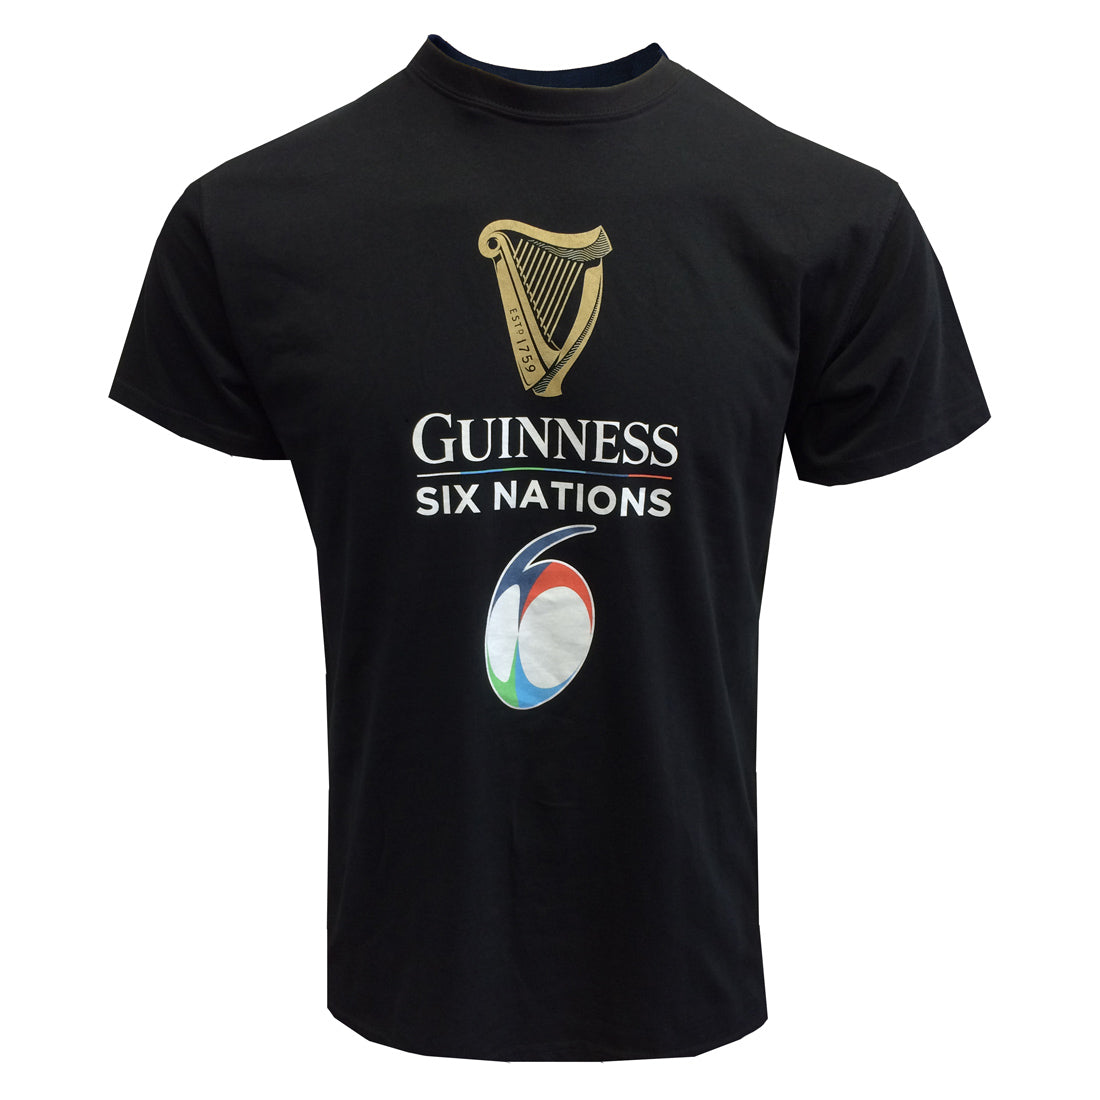 Guinness Six Nations Black Tee with the "Official Guinness Six Nations Merchandise" logo featuring a gold harp above a colorful rugby ball.